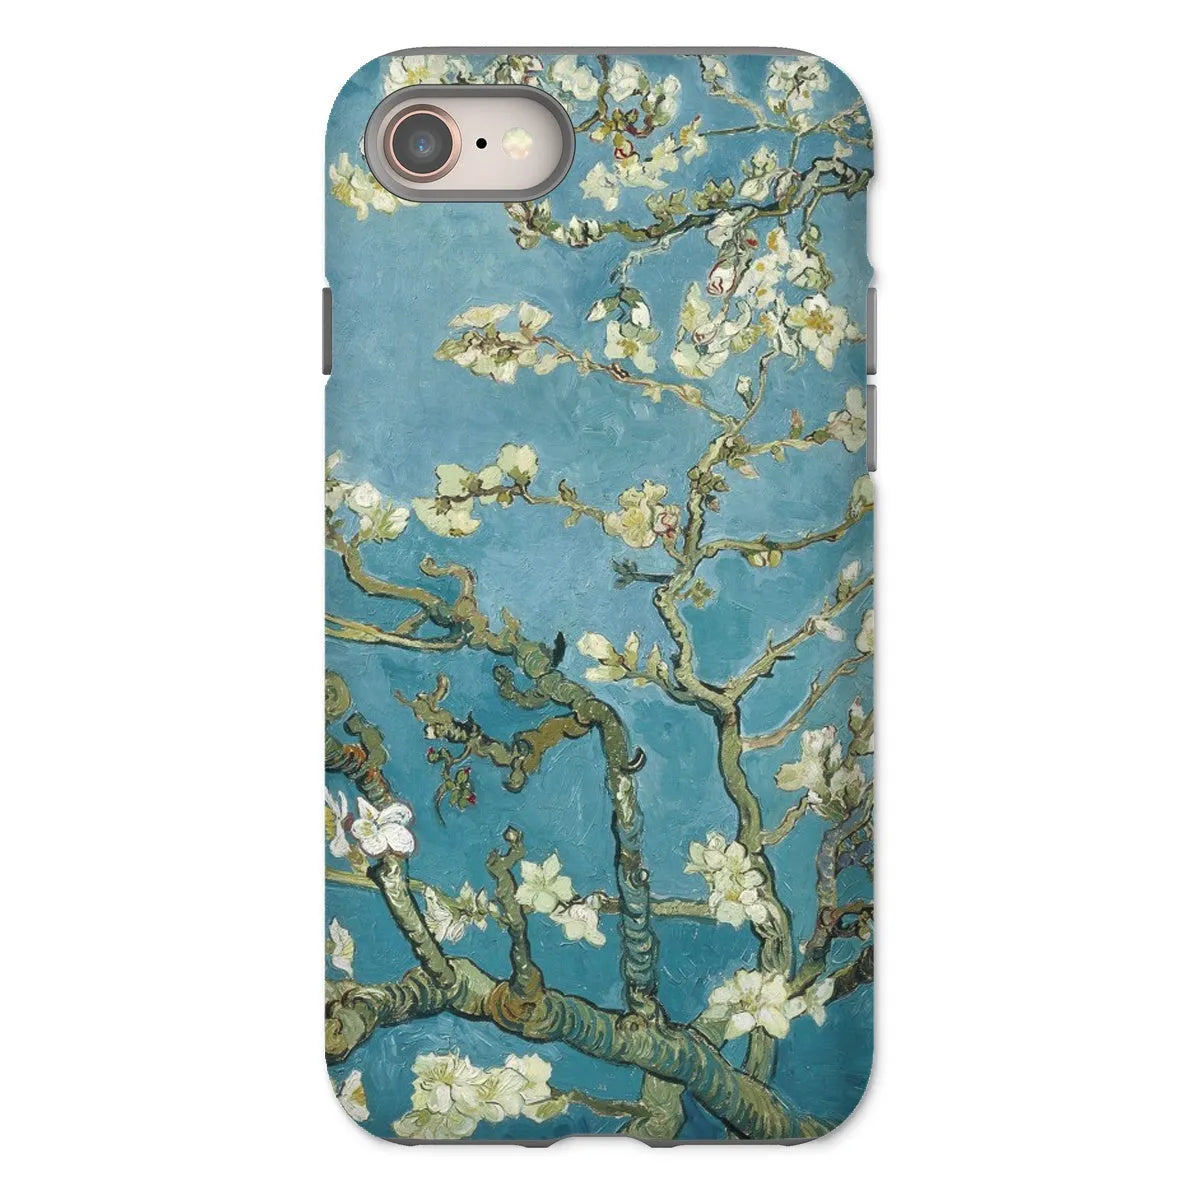 Almond Blossom - Vincent Van Gogh Aesthetic Phone Case - Iphone 8 / Matte - Mobile Phone Cases - Aesthetic Art